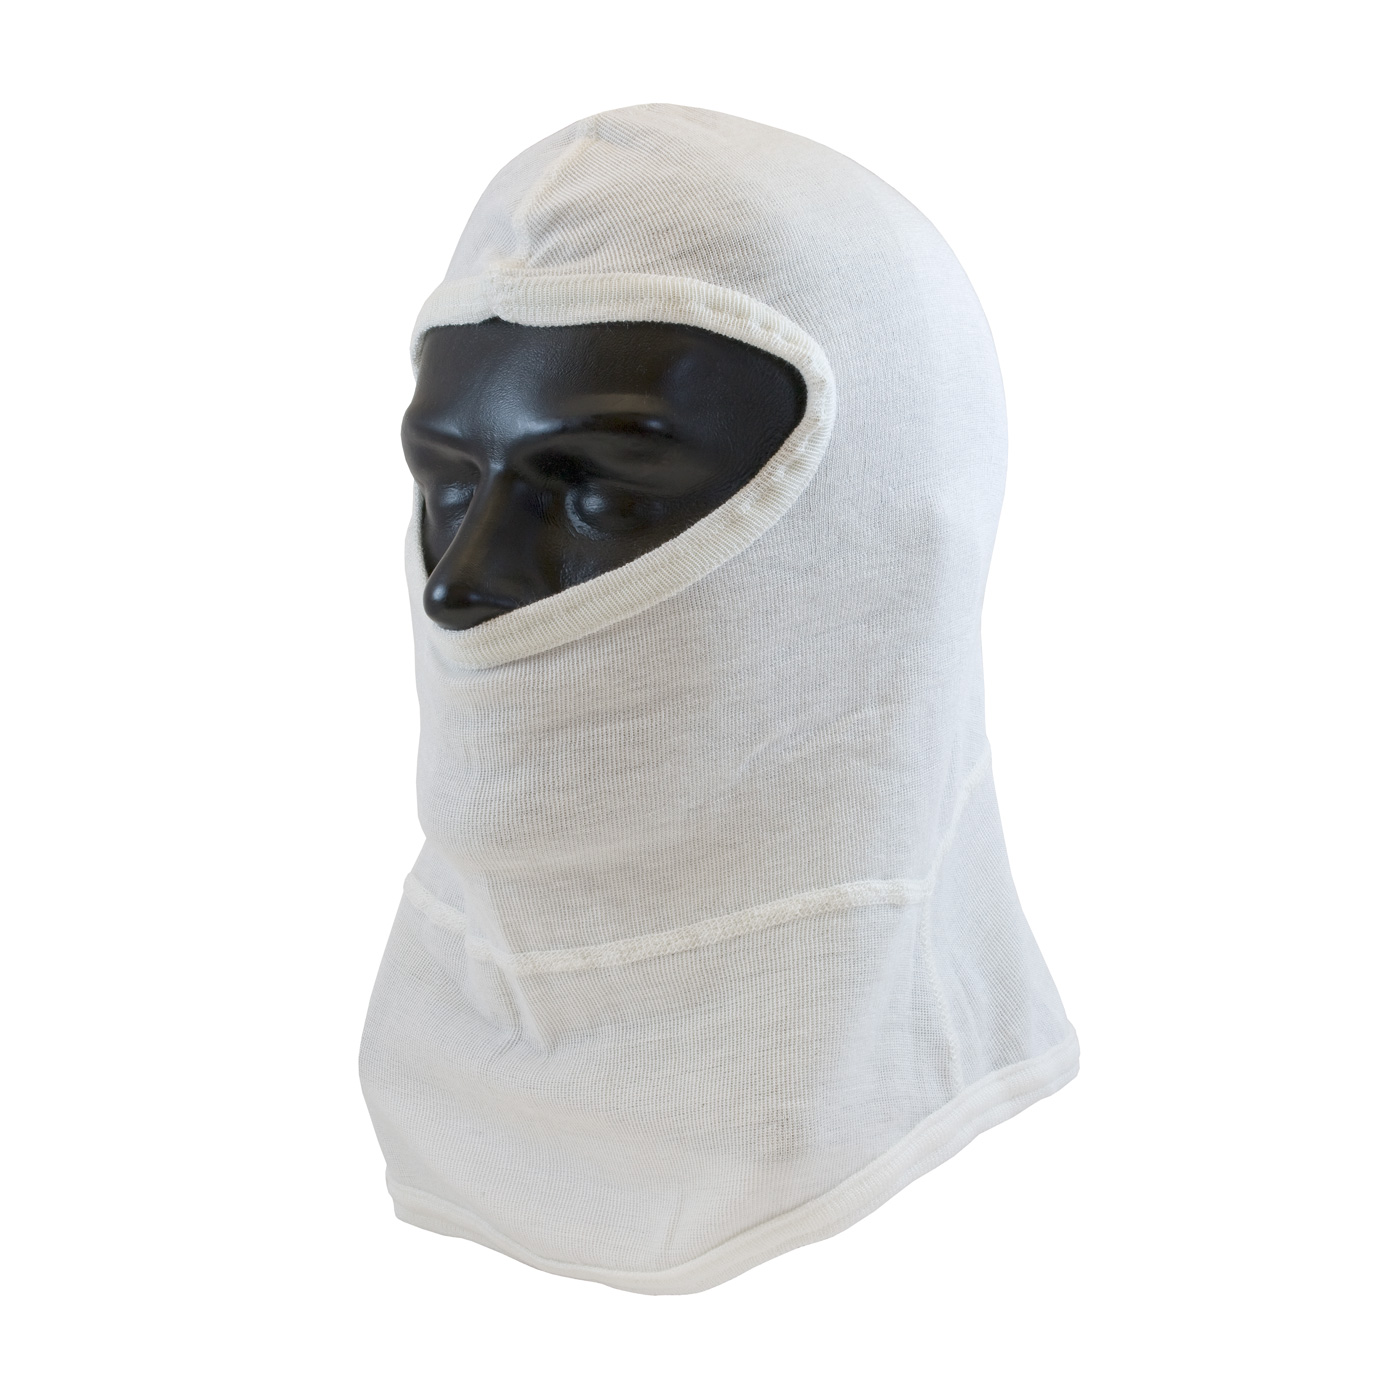 PIP® Nomex® White Single Layer Fire Resistant Full Face Hood With Bib - One Size